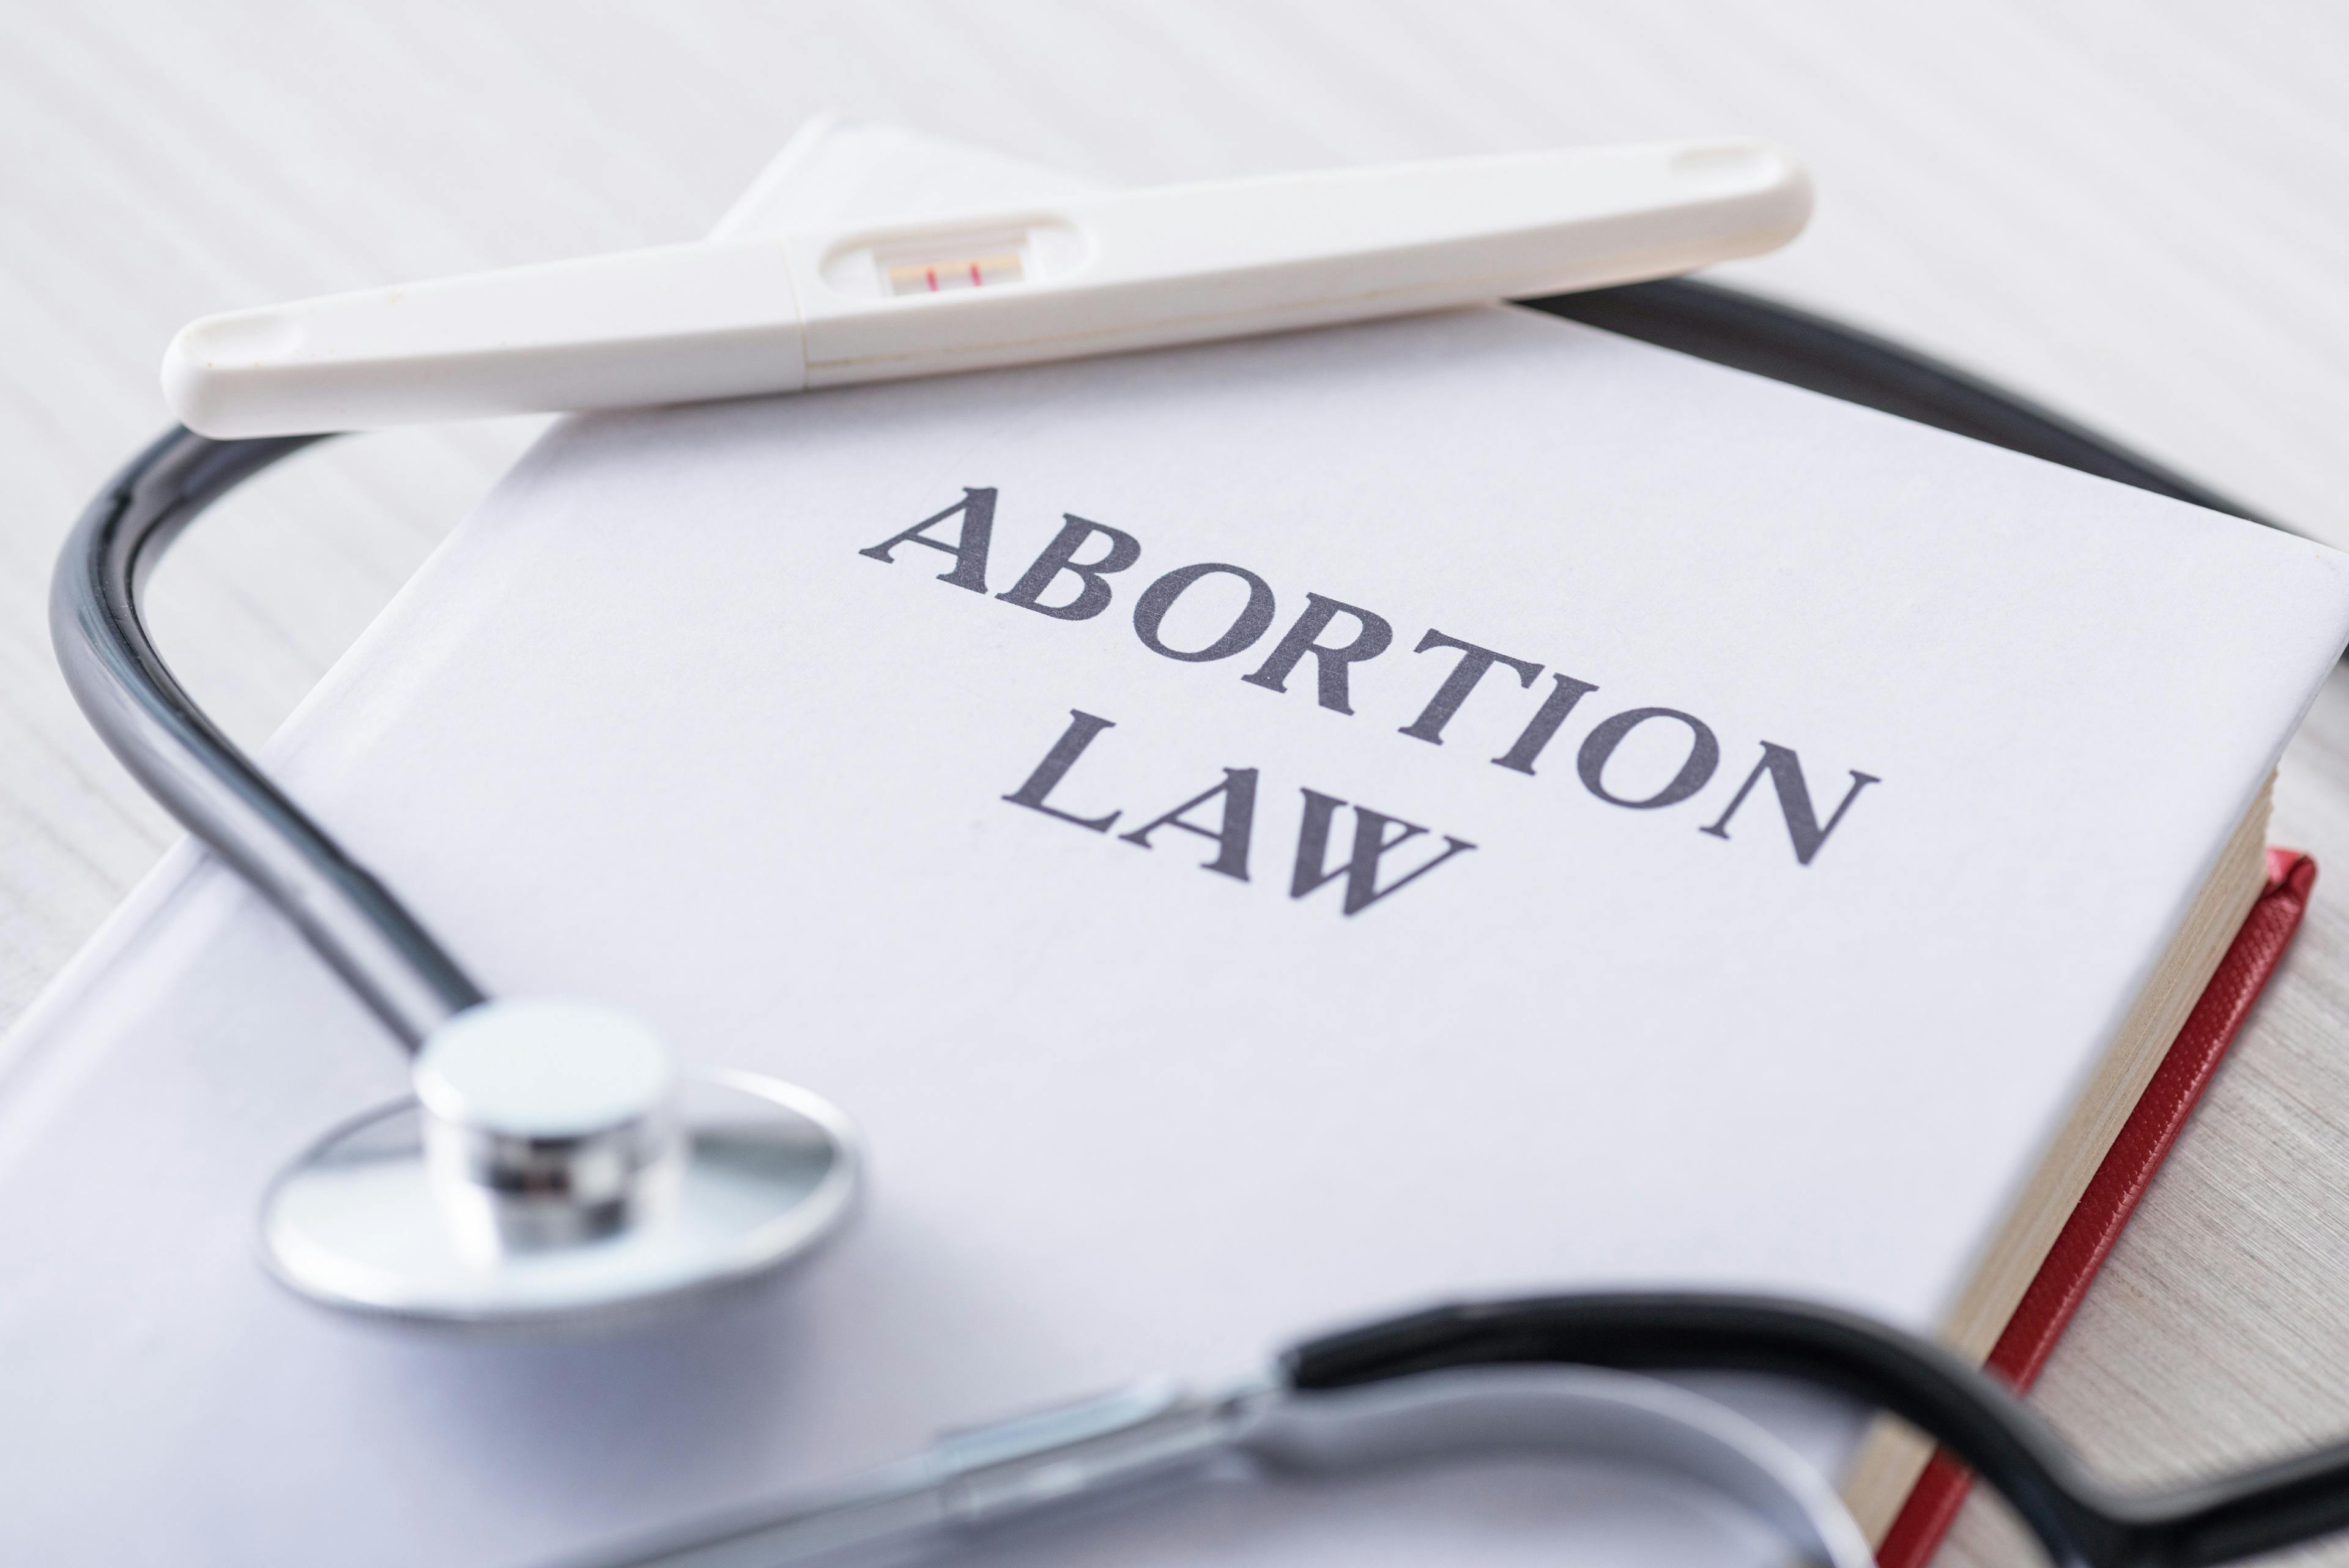 New Hampshire's abortion restrictions